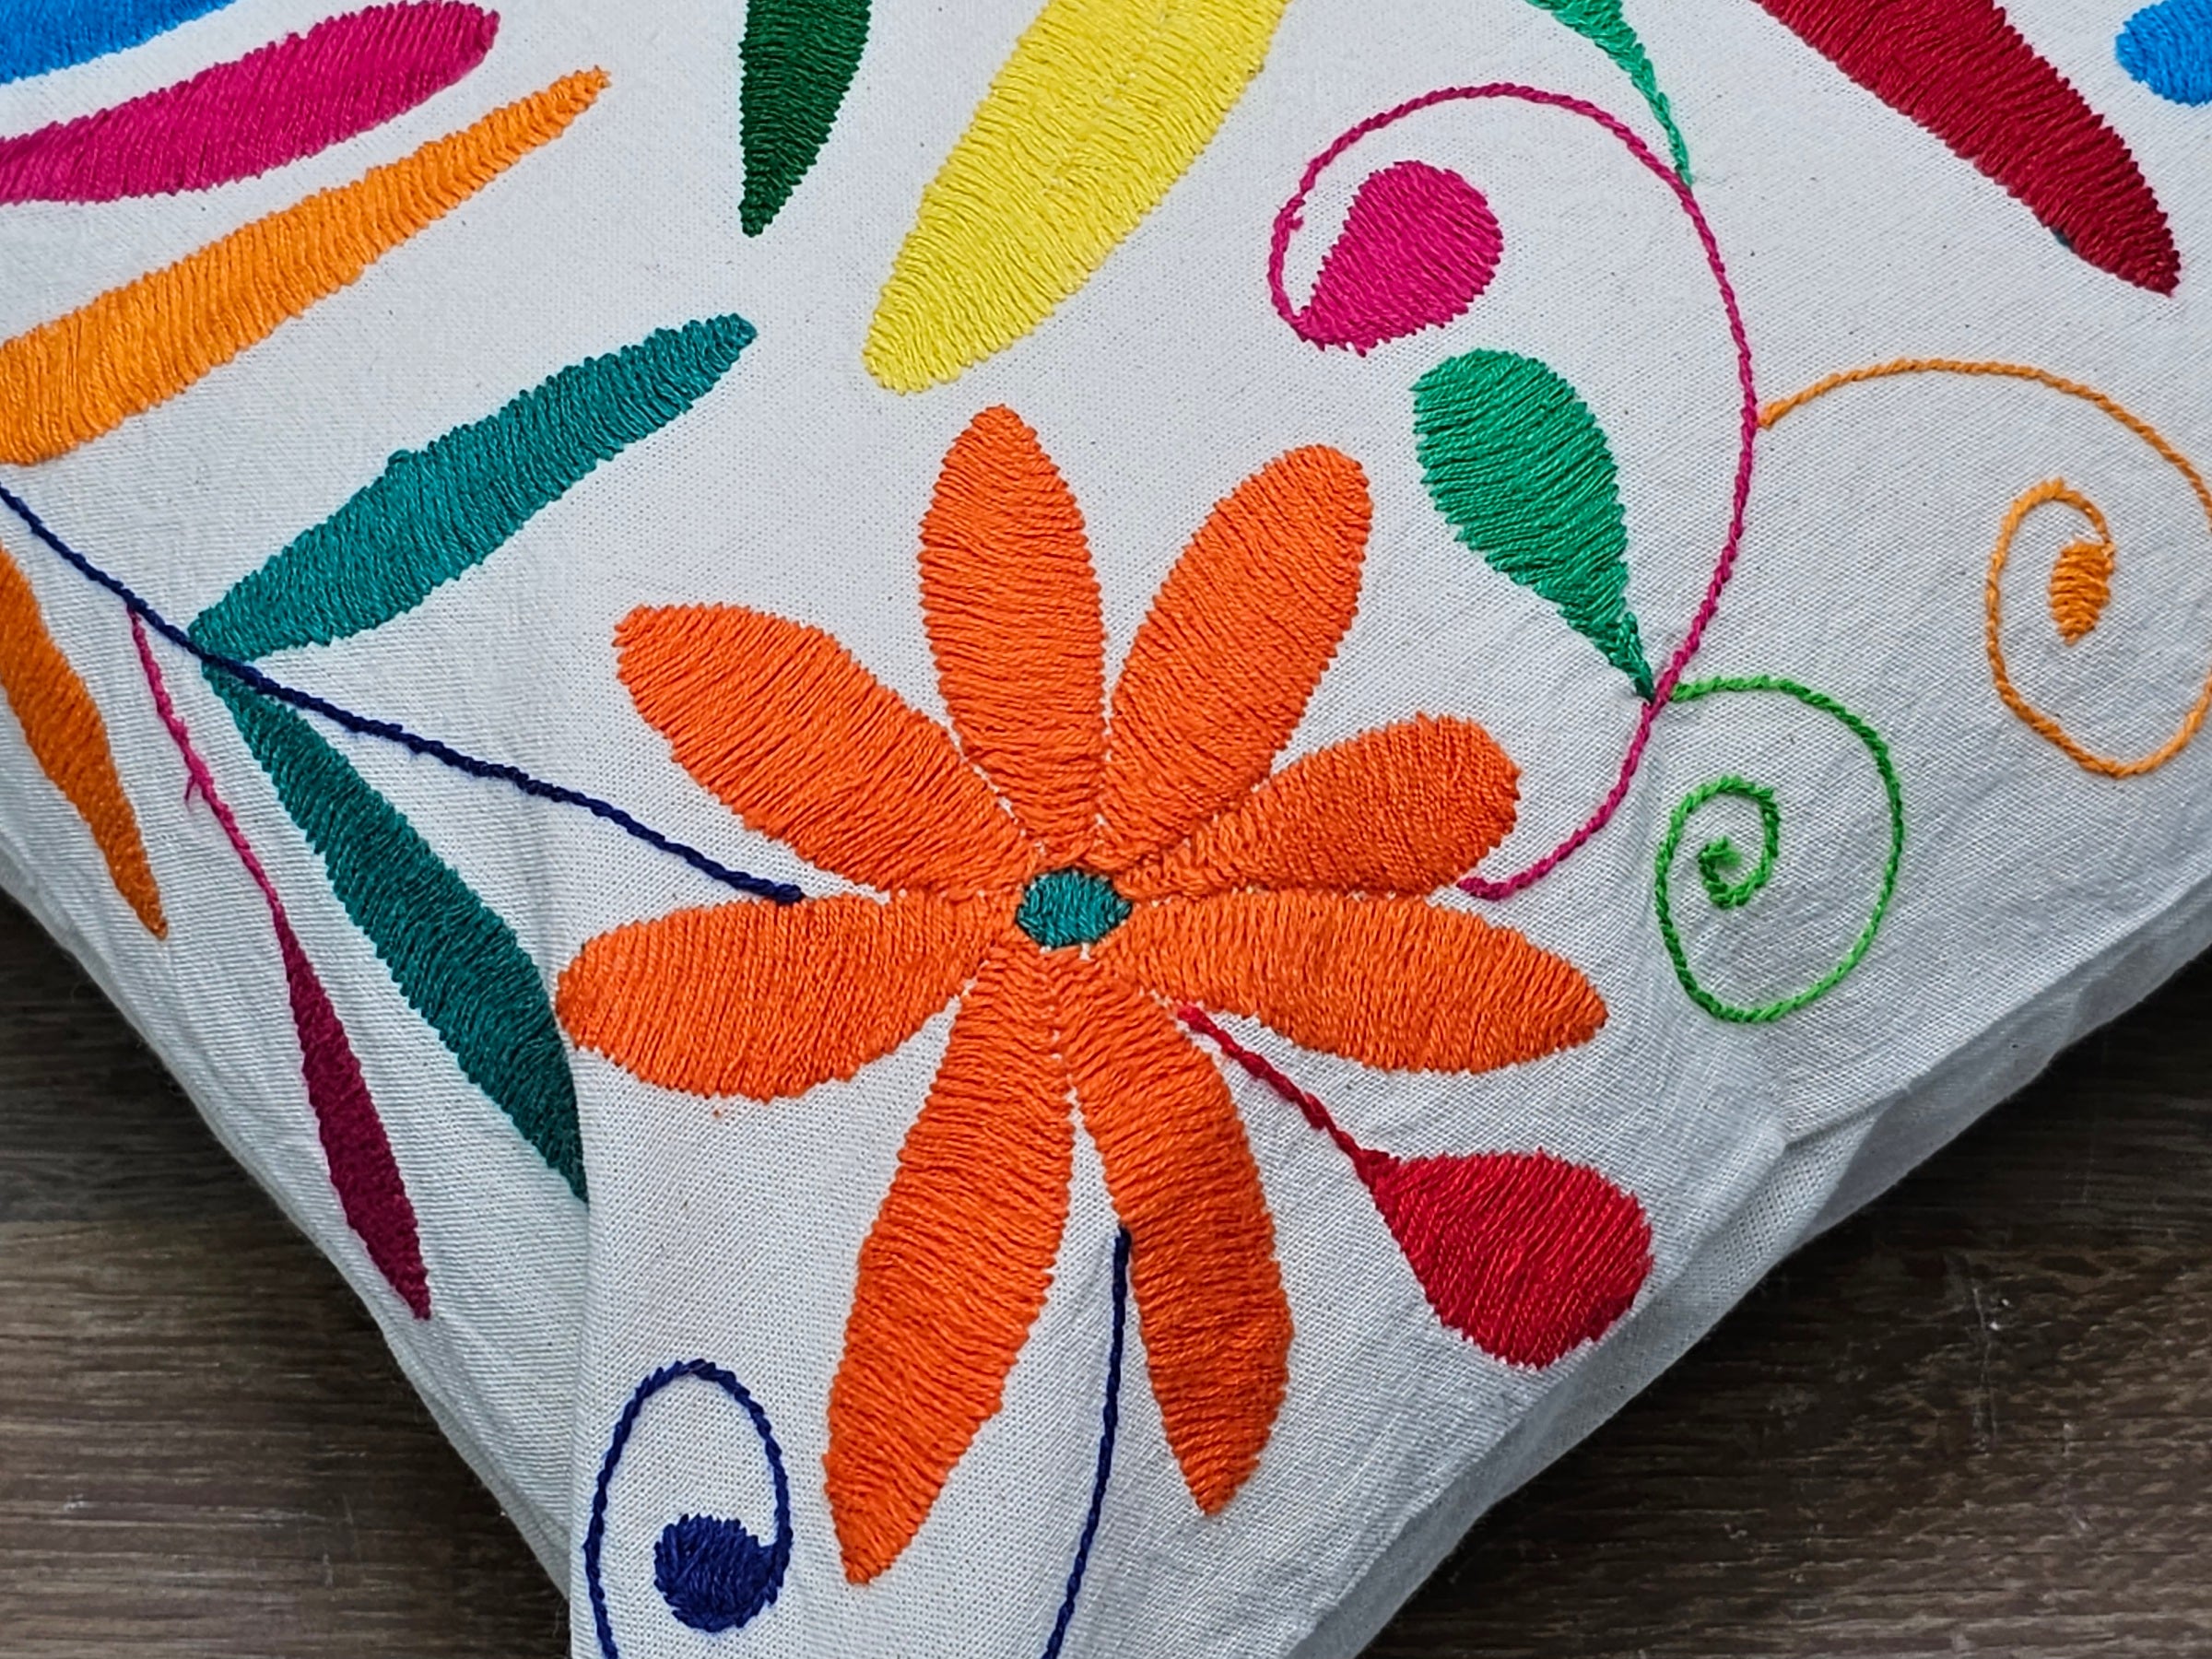 Square Otomi Tenango Pillow Cover with Hand Embroidered Dragonfly and Flower Design in Vibrant Colors. Handmade in Mexico. Ships from the USA. Buy now at www.felipeandgrace.com.